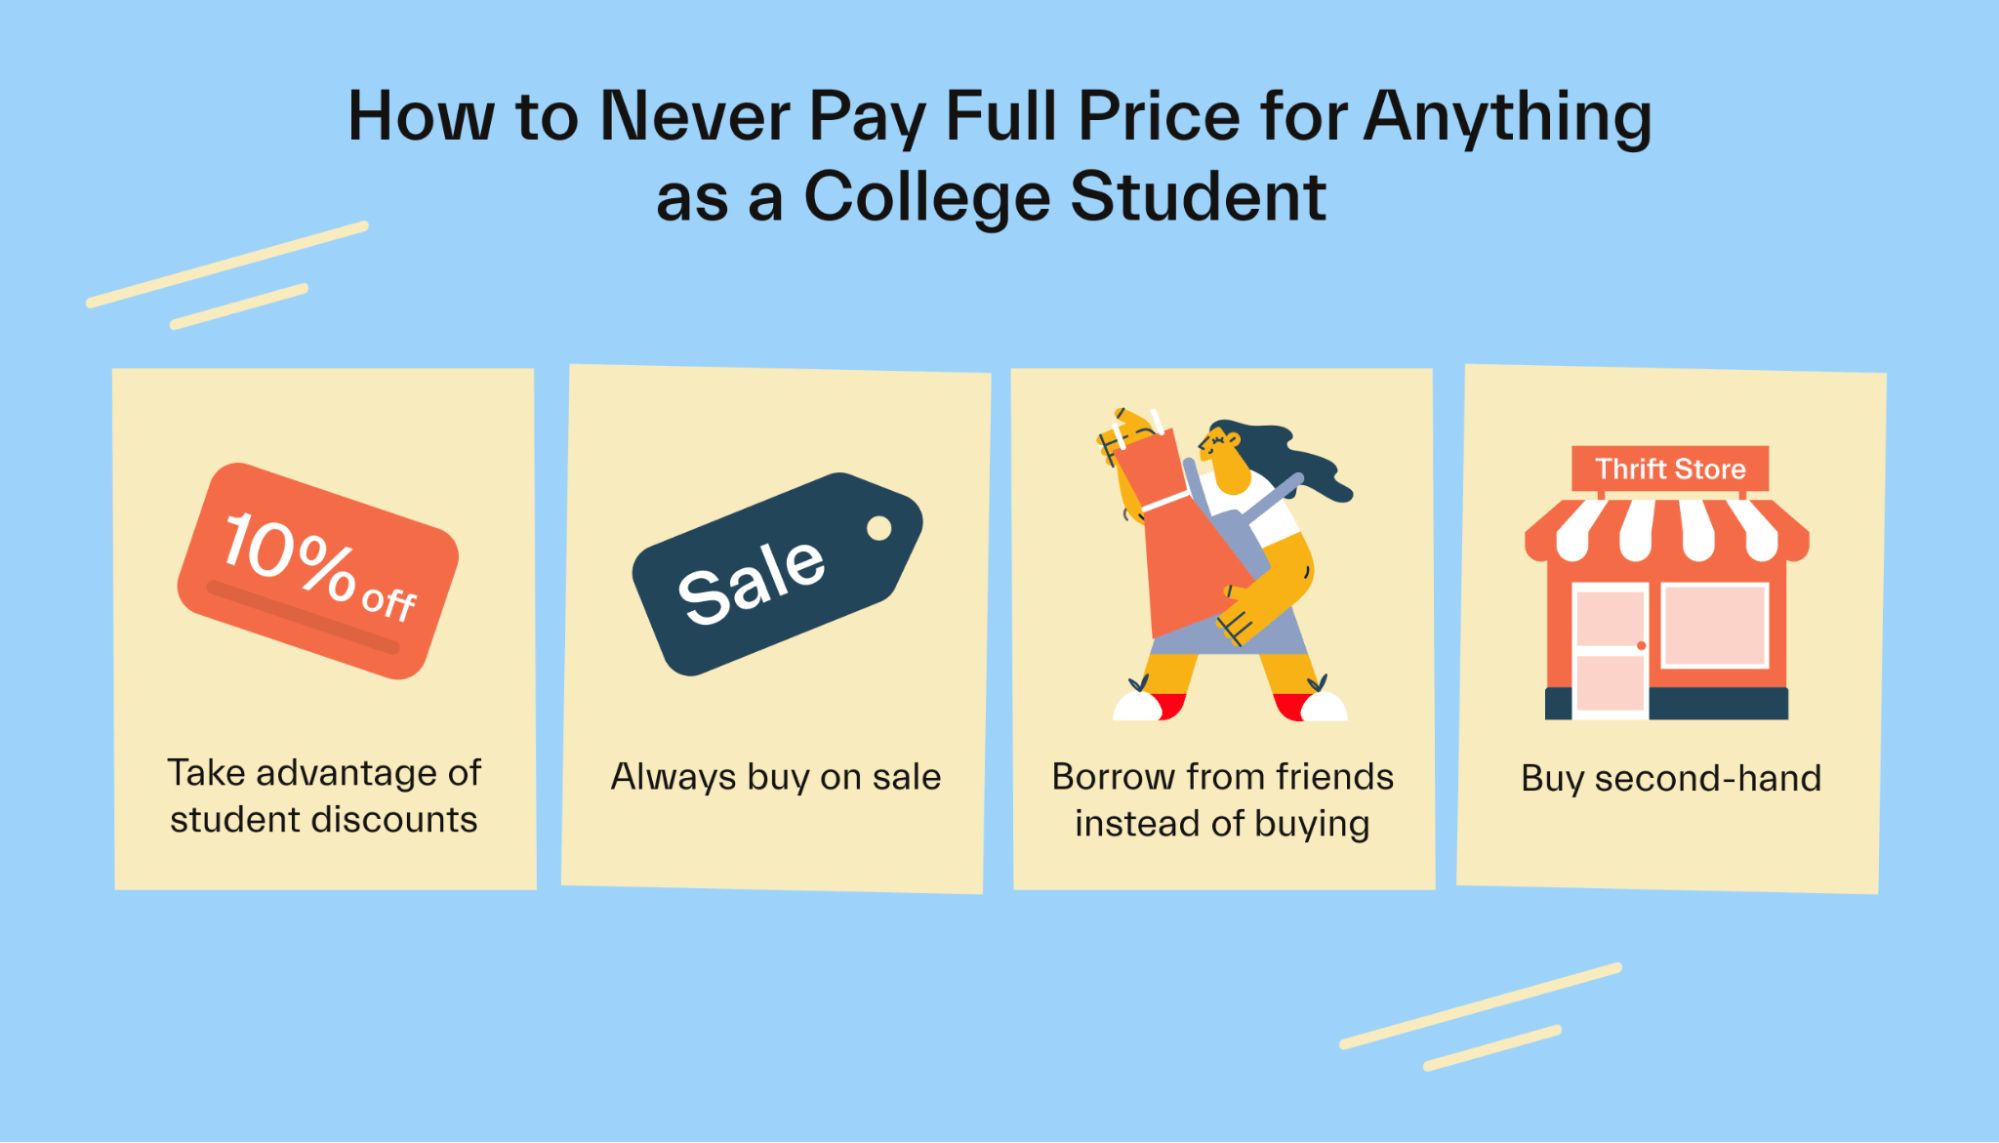 How to Never Pay Full Price